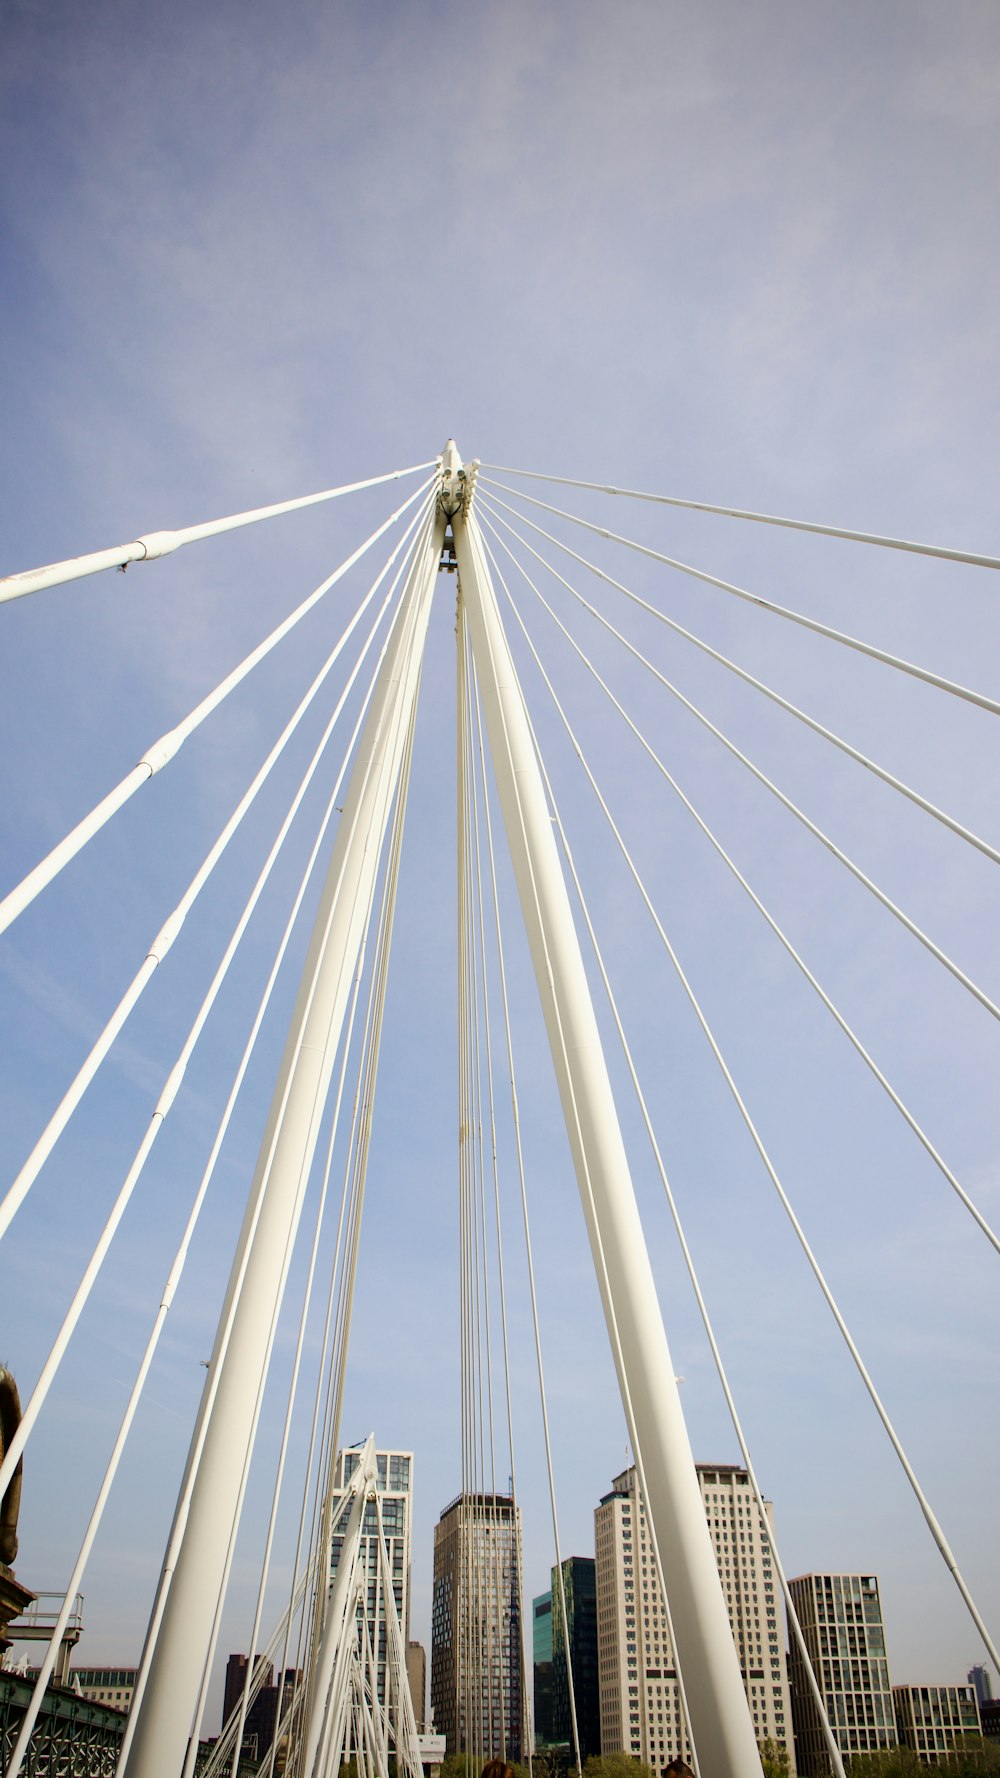 a tall white bridge spanning over a city